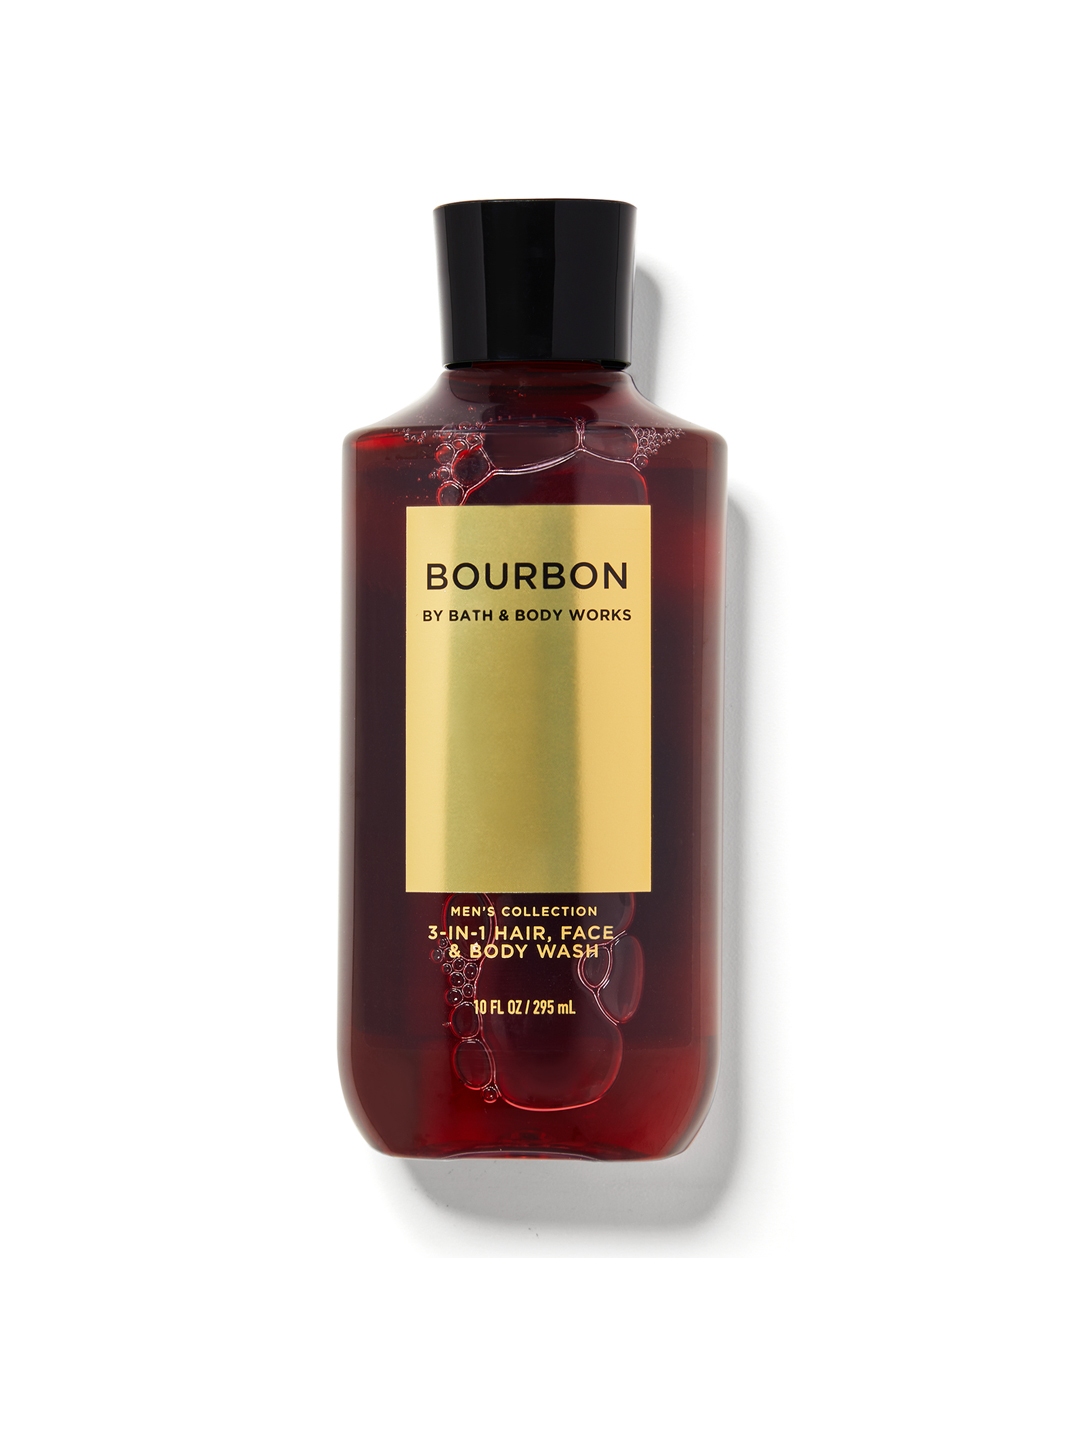 Buy Bath And Body Works Bourbon 3 In 1 Hair Face And Body Wash 295 Ml Body Wash And Shower Gel